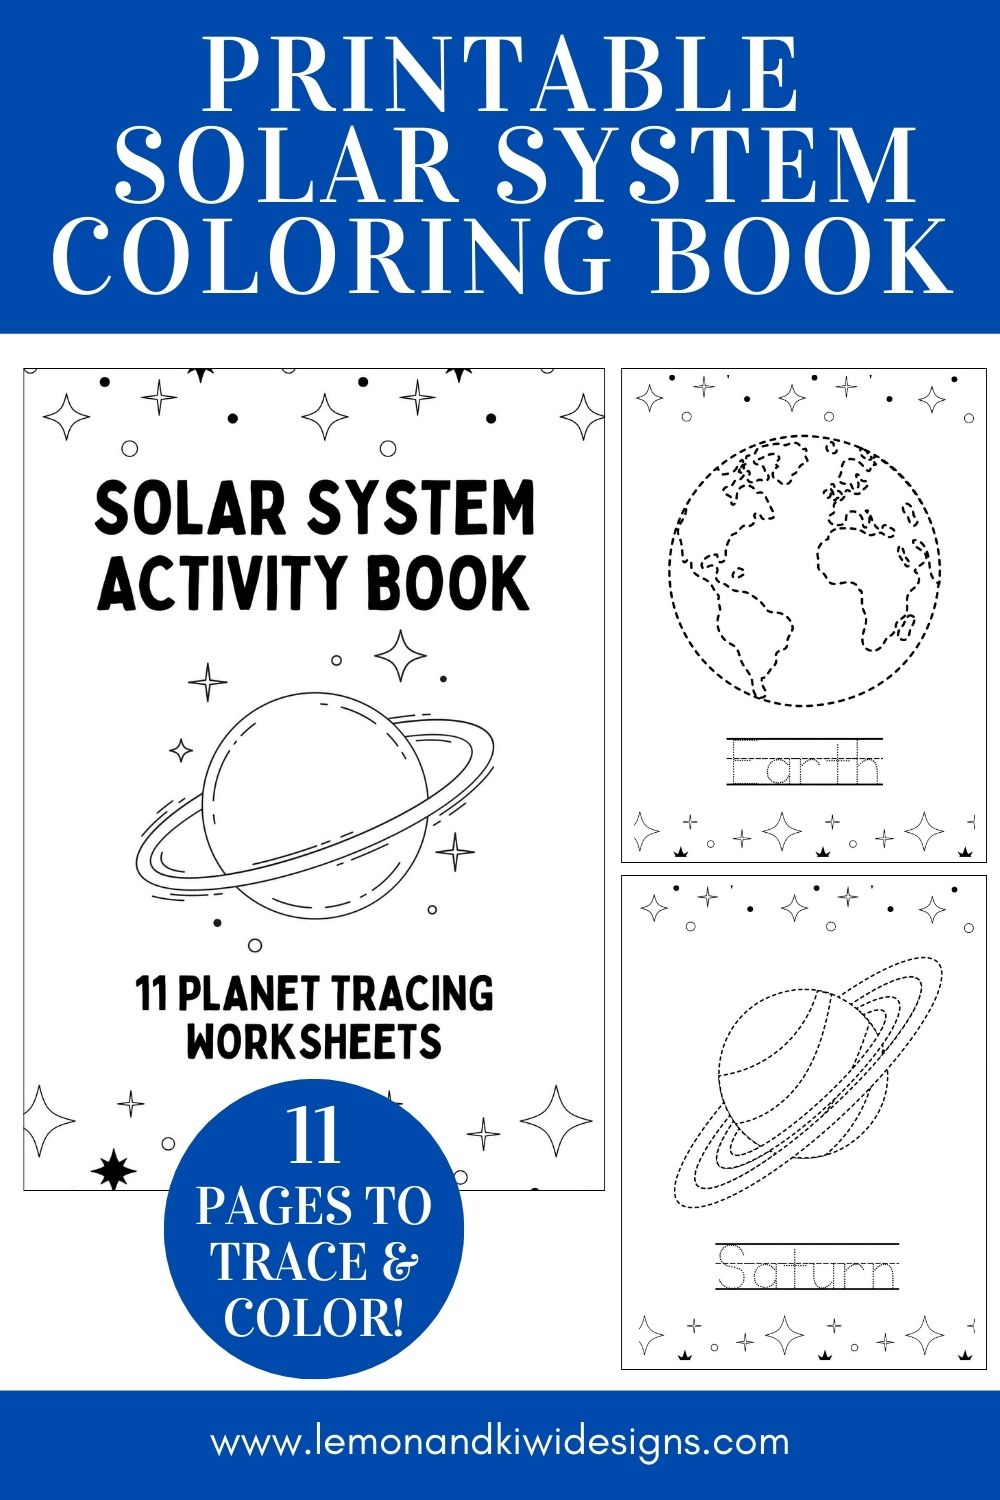 Solar System Coloring Book with Individual Planet Coloring Pages